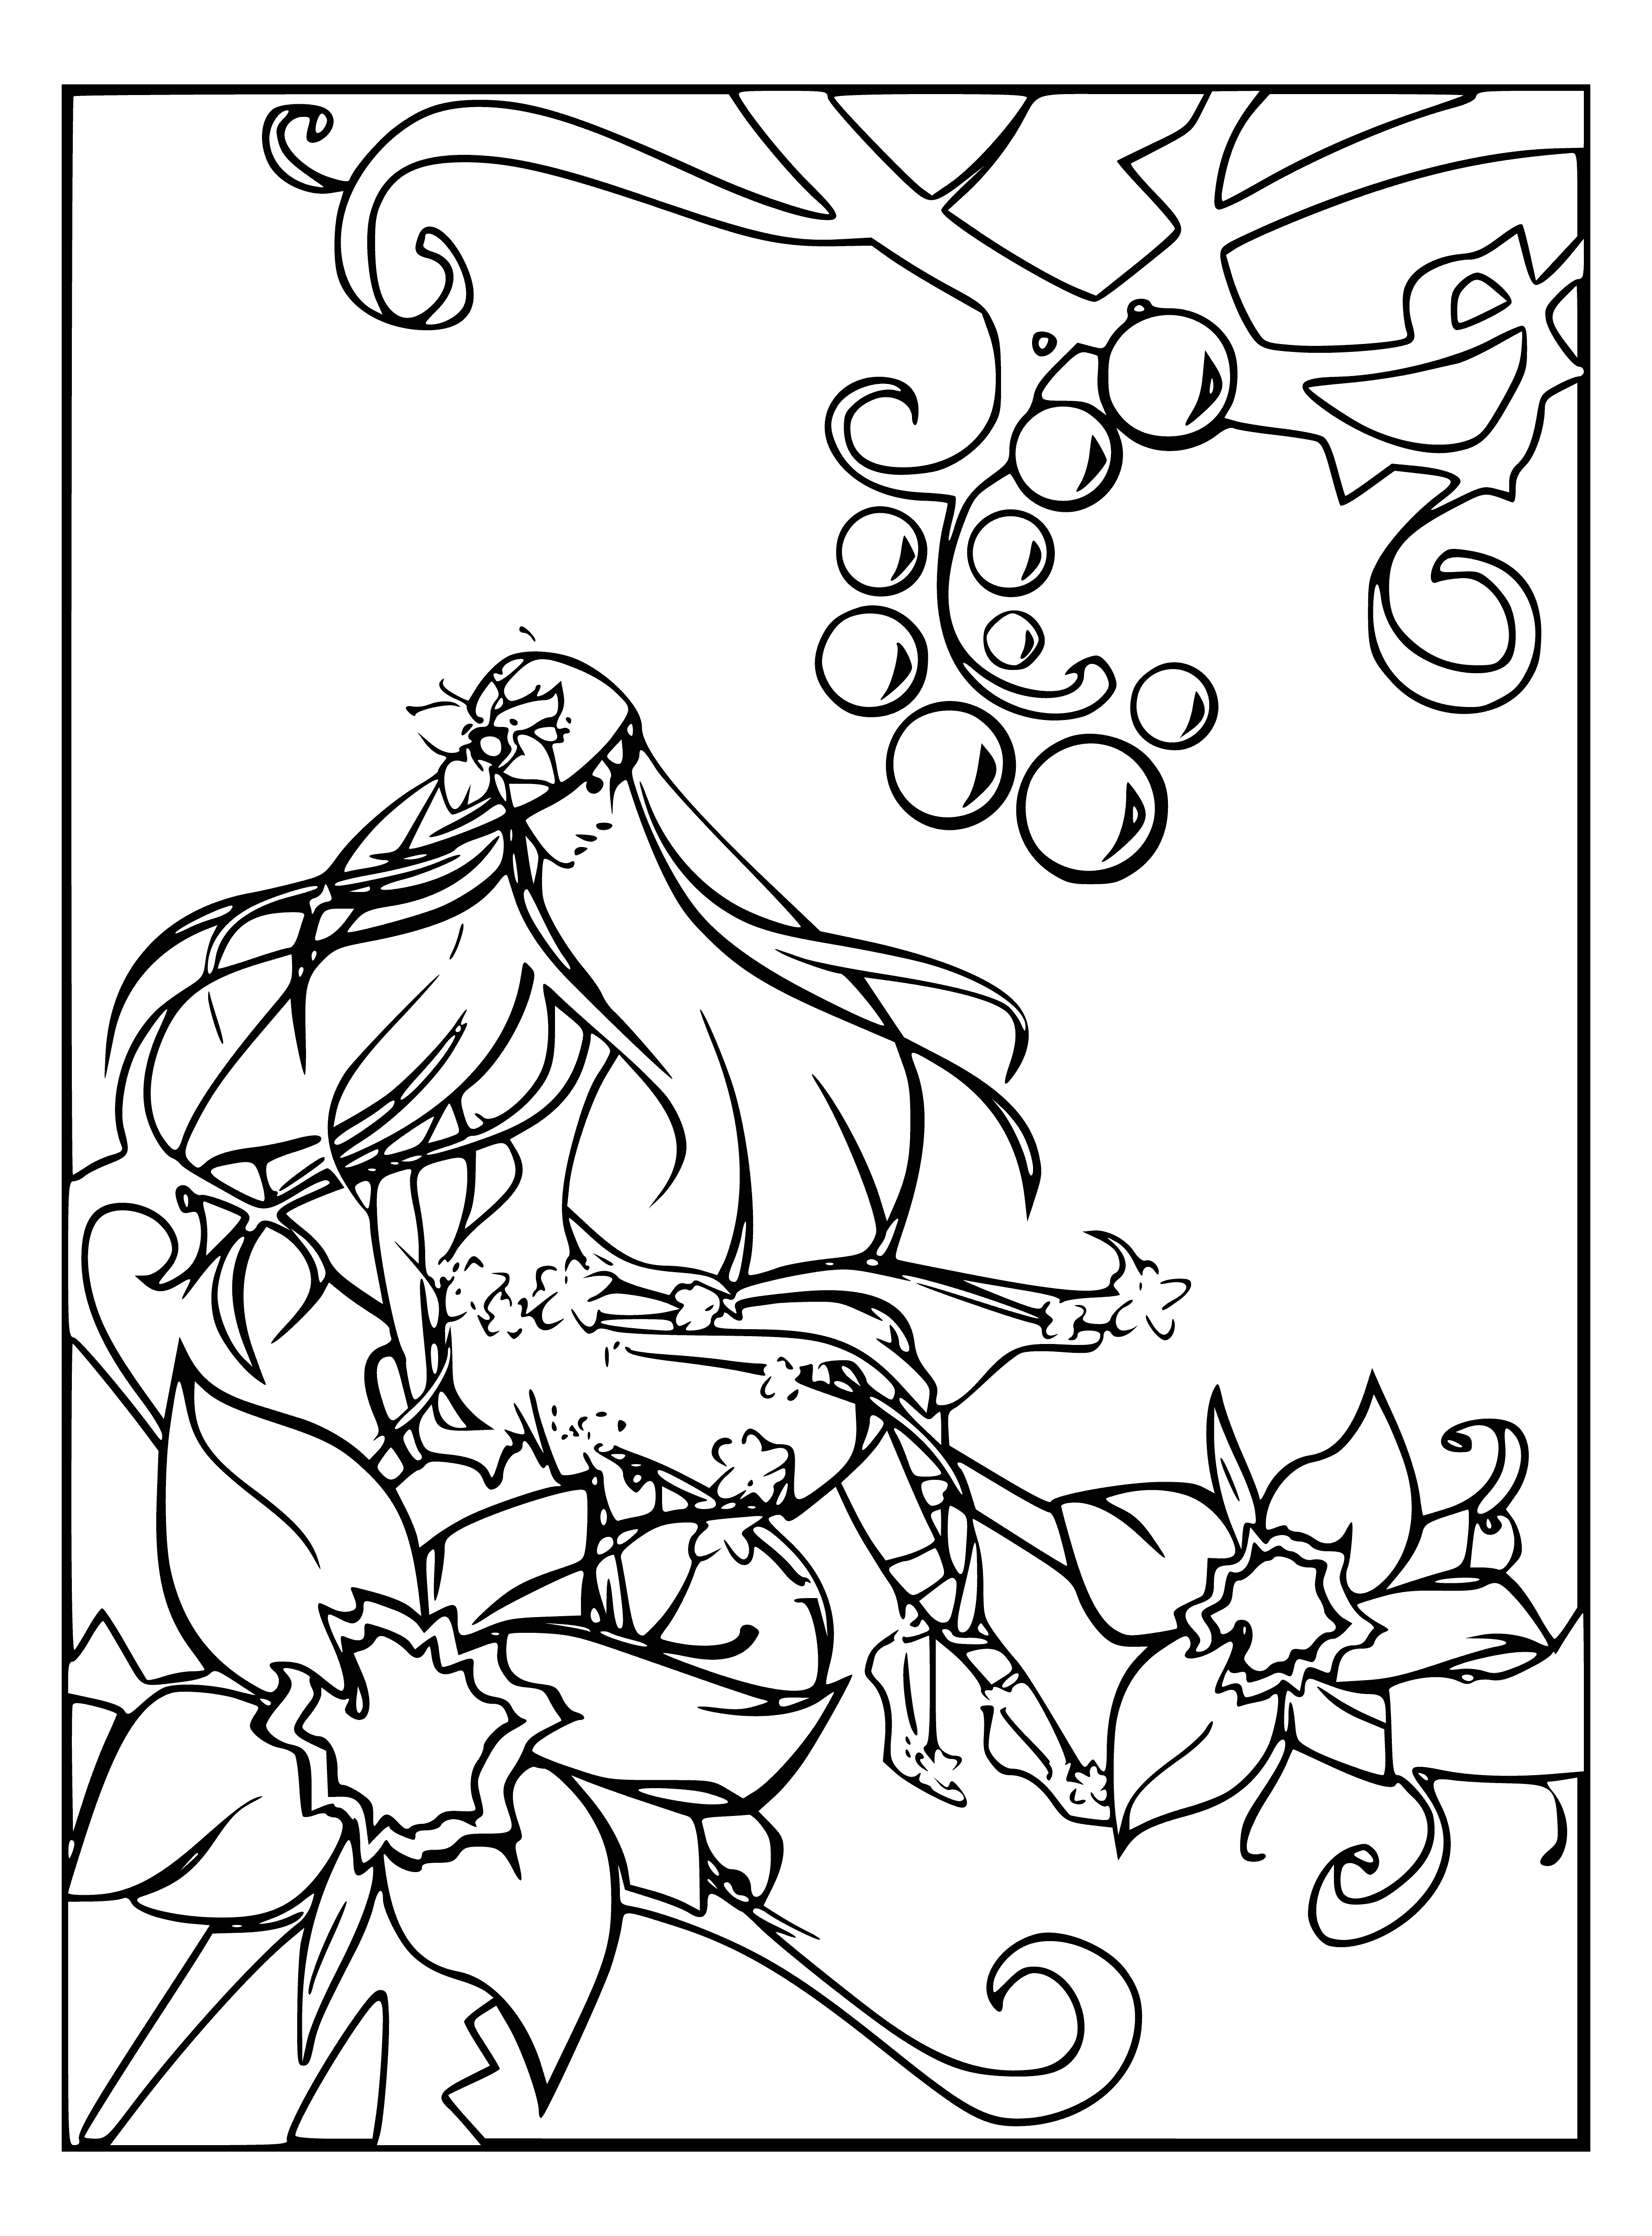 coloring page: Small girl, no bigger than a thumb, sits on flower in sun-drenched field; wrapped in blue & white dress, golden hair cascades, holding a flower, looks contentedly at world around her.